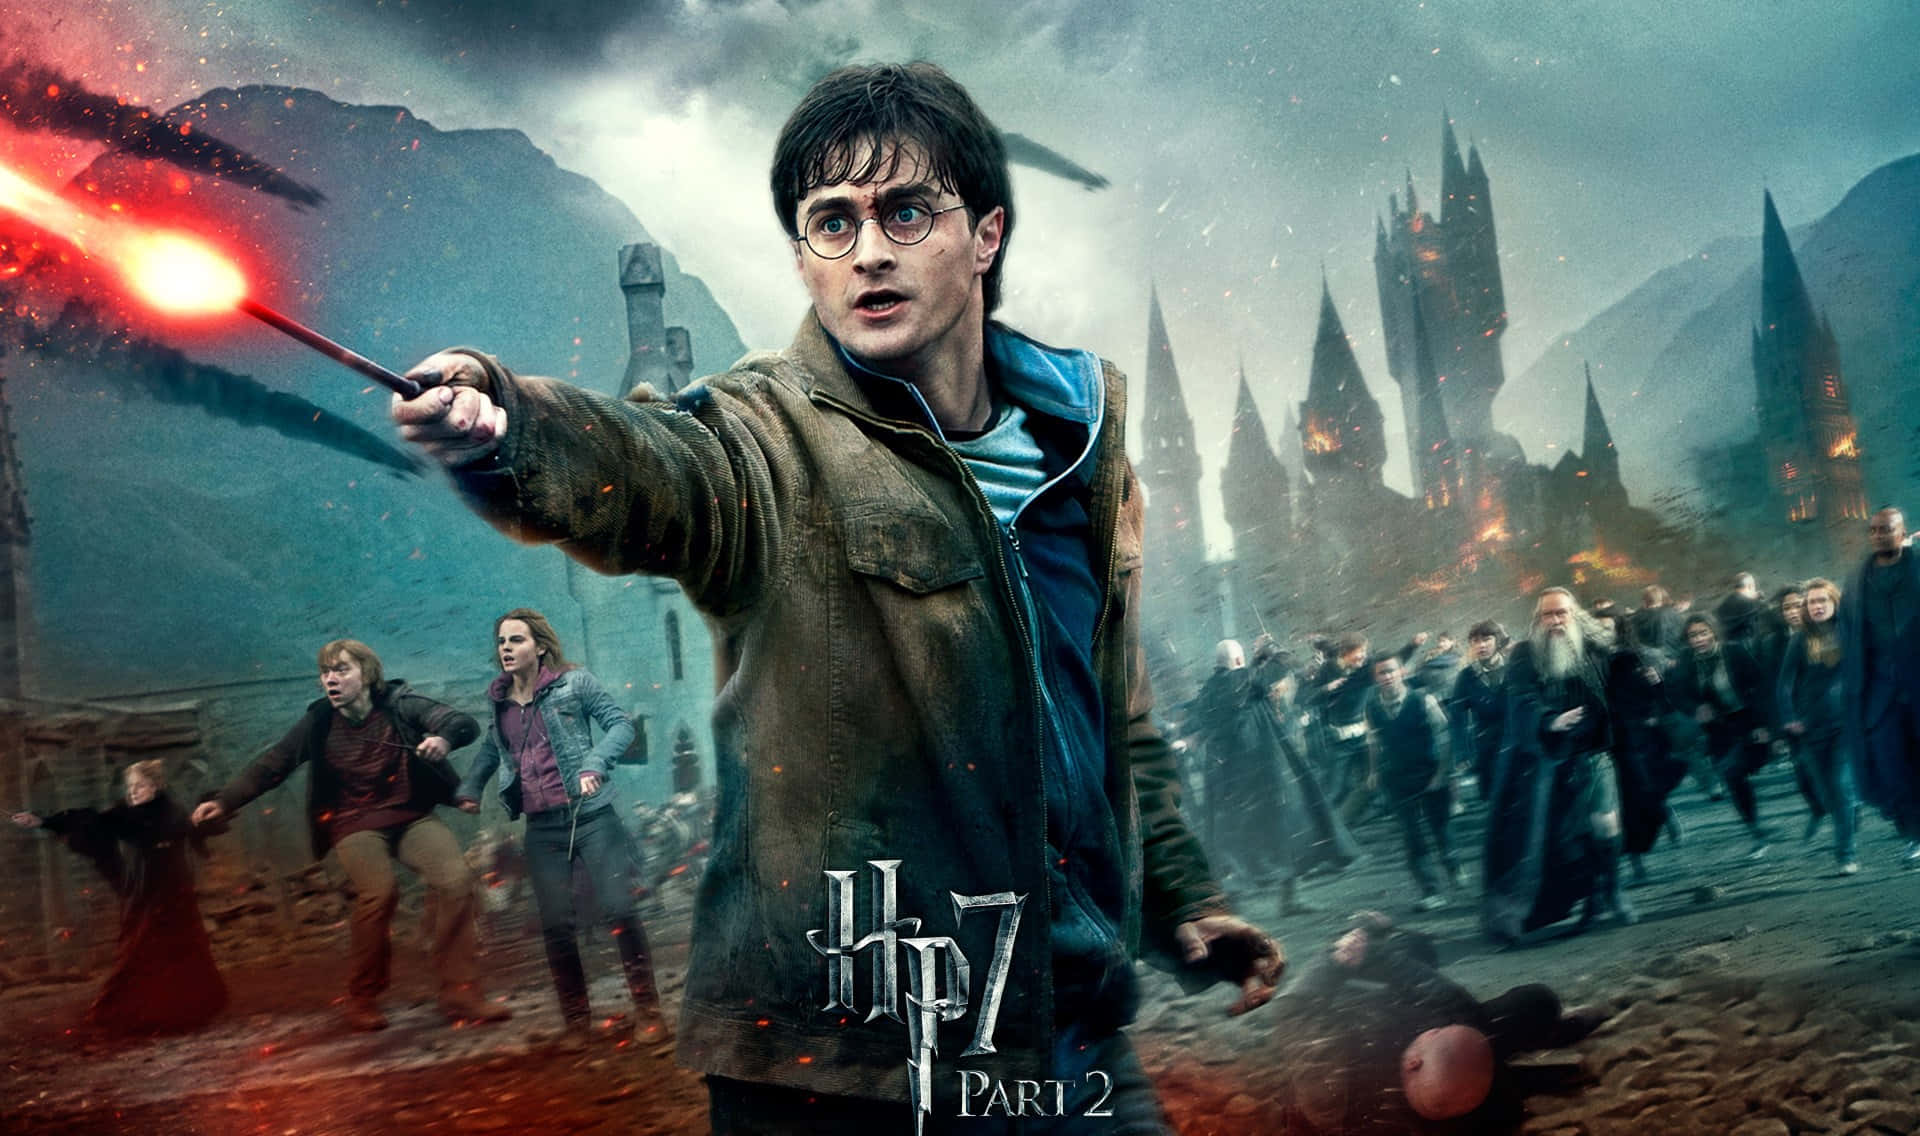 Harry Potter Landscape Casting Spell With Wand Wallpaper